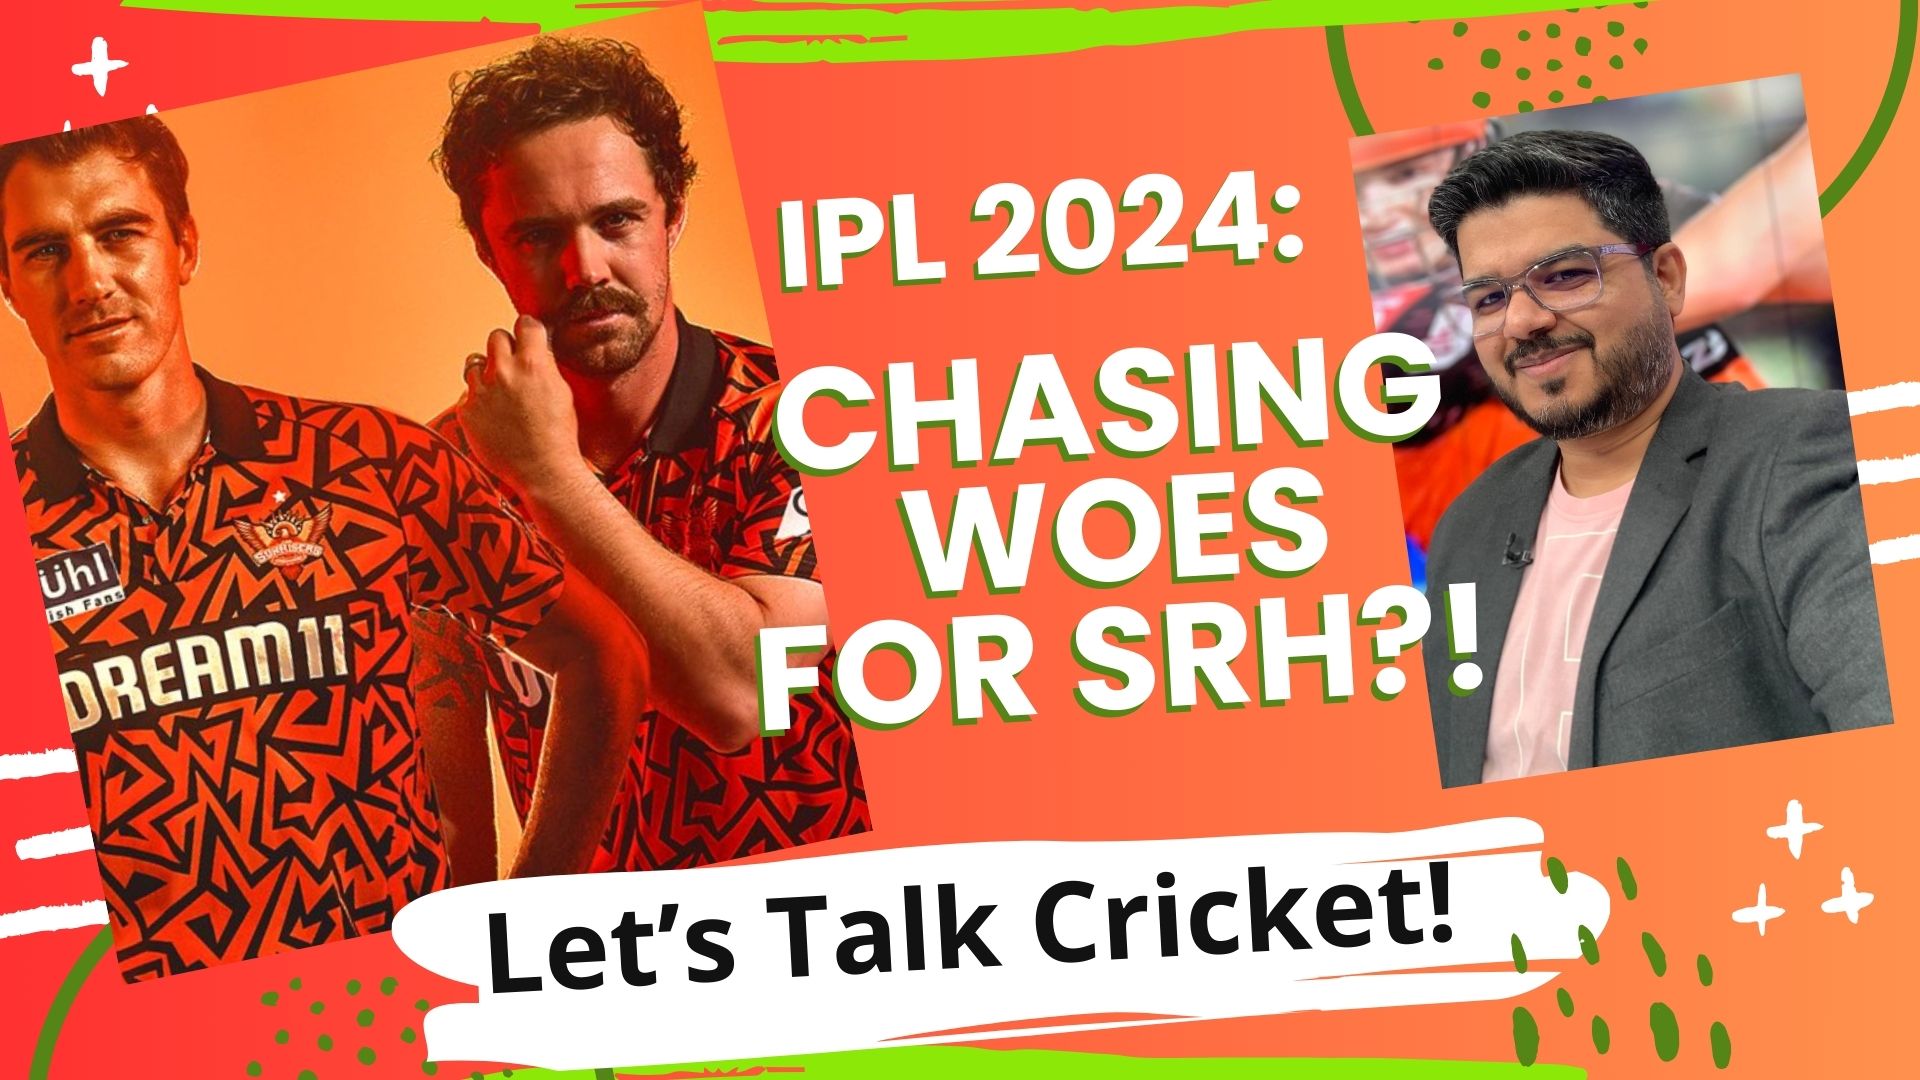 SRH's chase challenge: Weakness exposed?